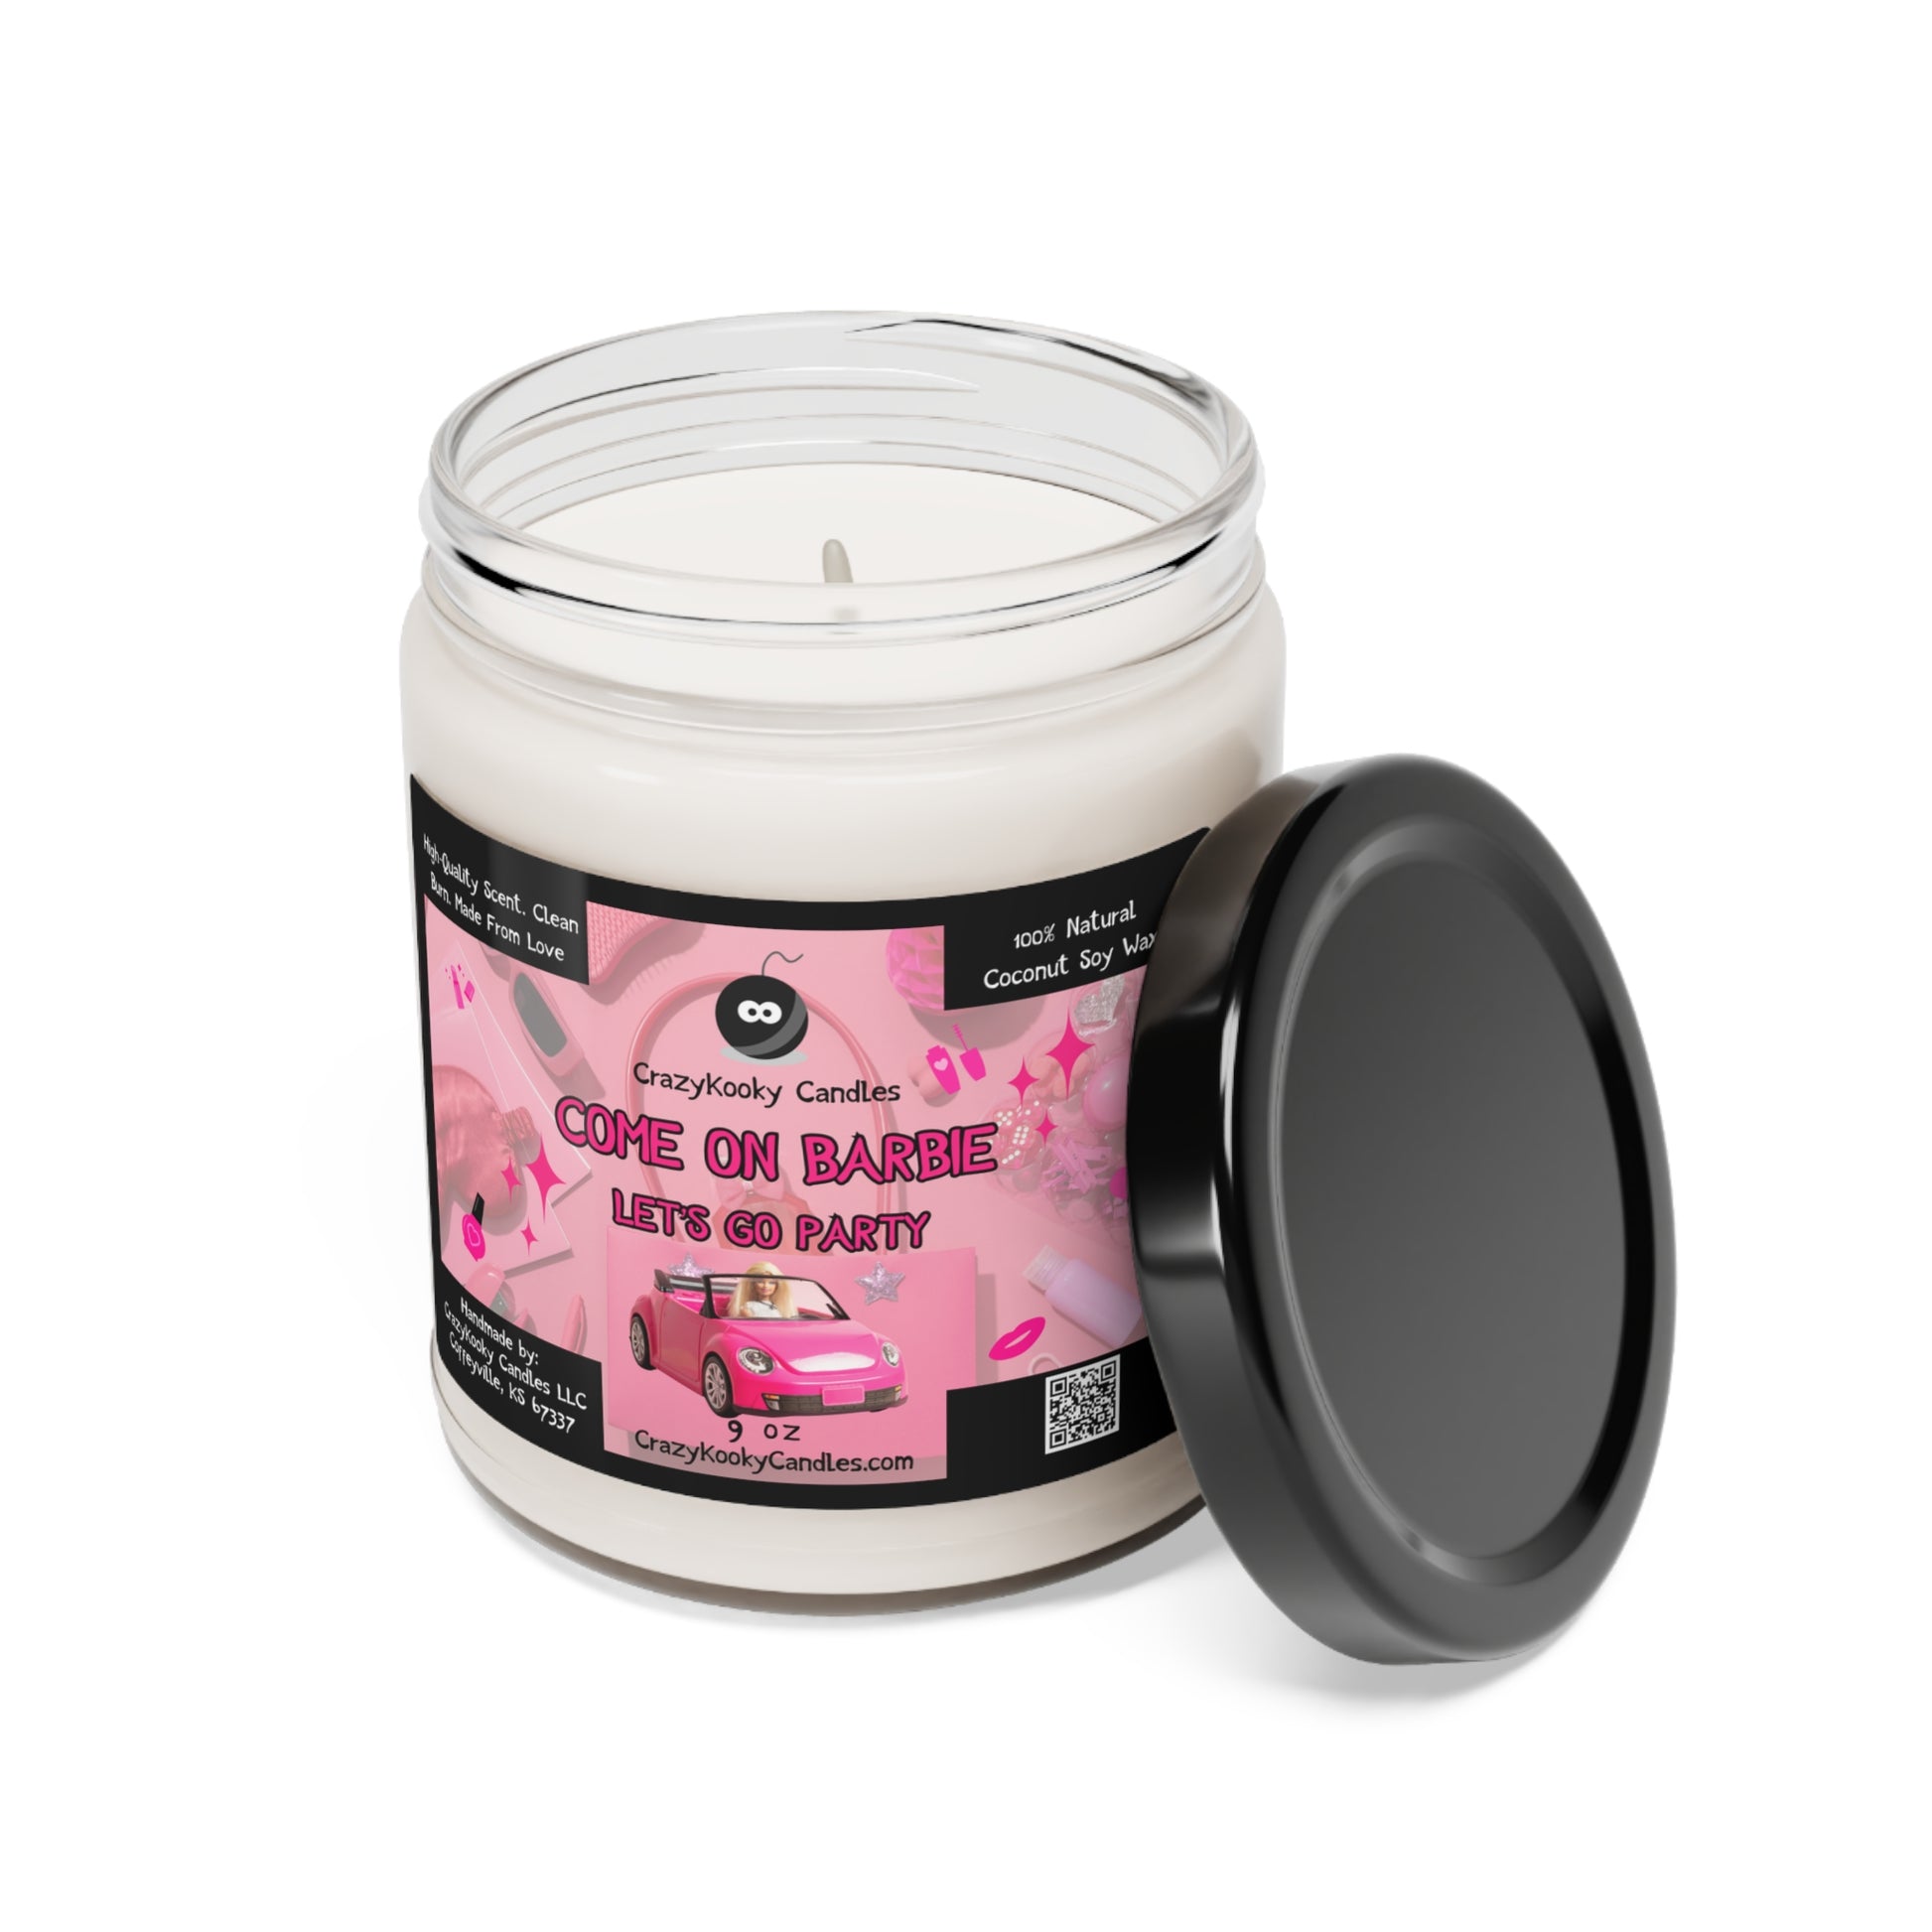 COME ON BARBIE LET'S GO PARTY - Funny Candle, Scented Coconut Soy Candle, 9oz - CrazyKooky Candles LLC